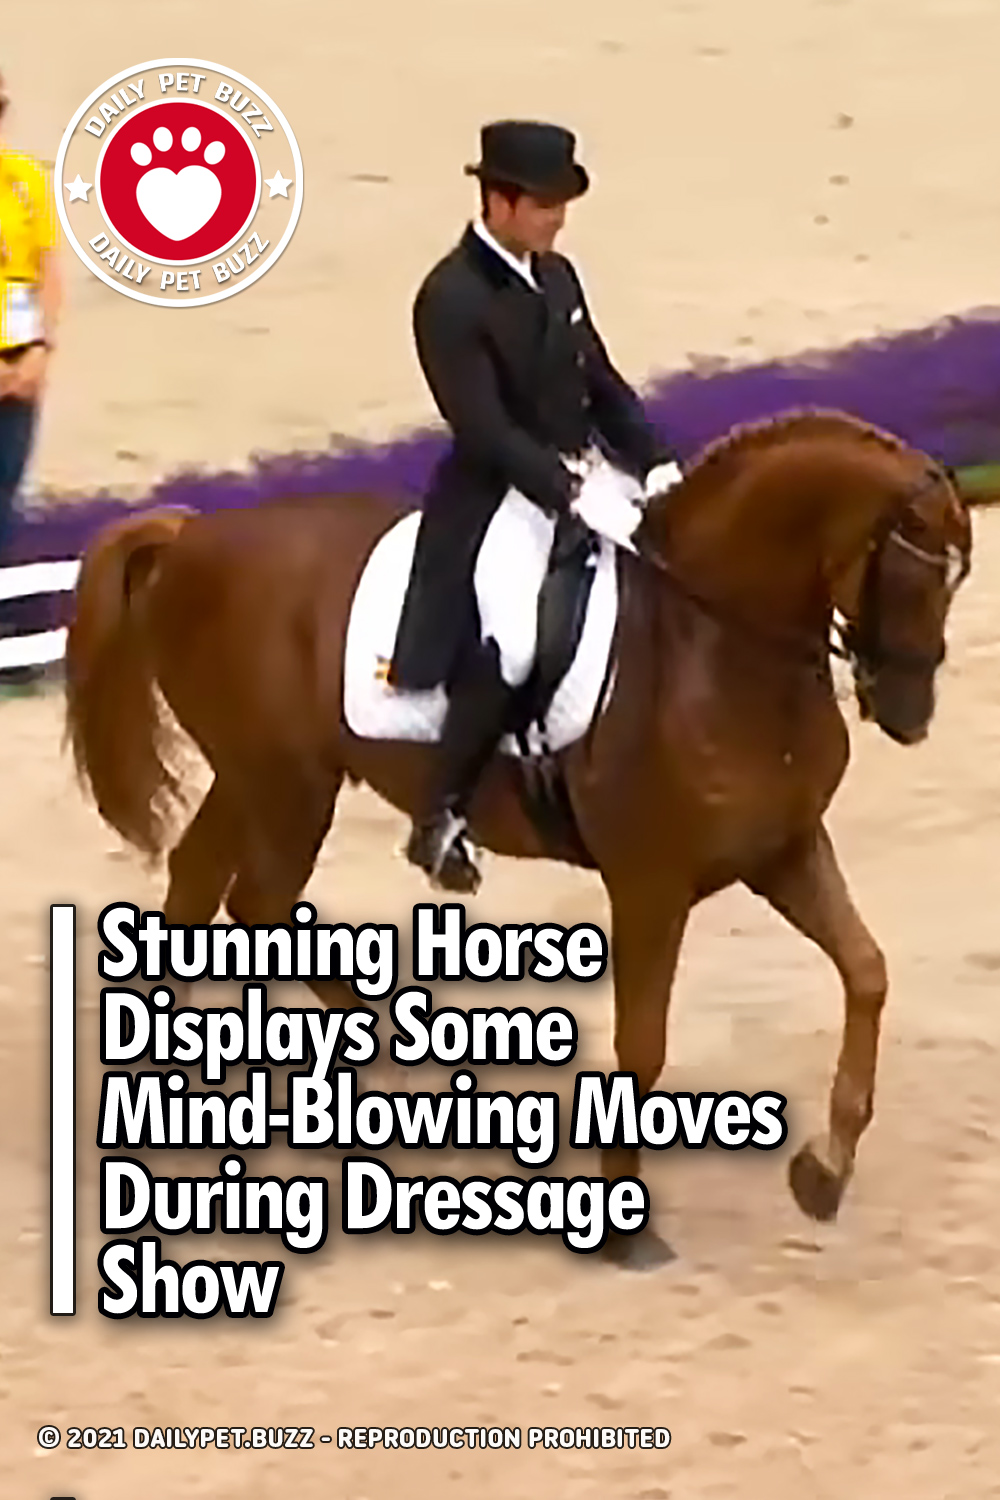 Stunning Horse Displays Some Mind-Blowing Moves During Dressage Show